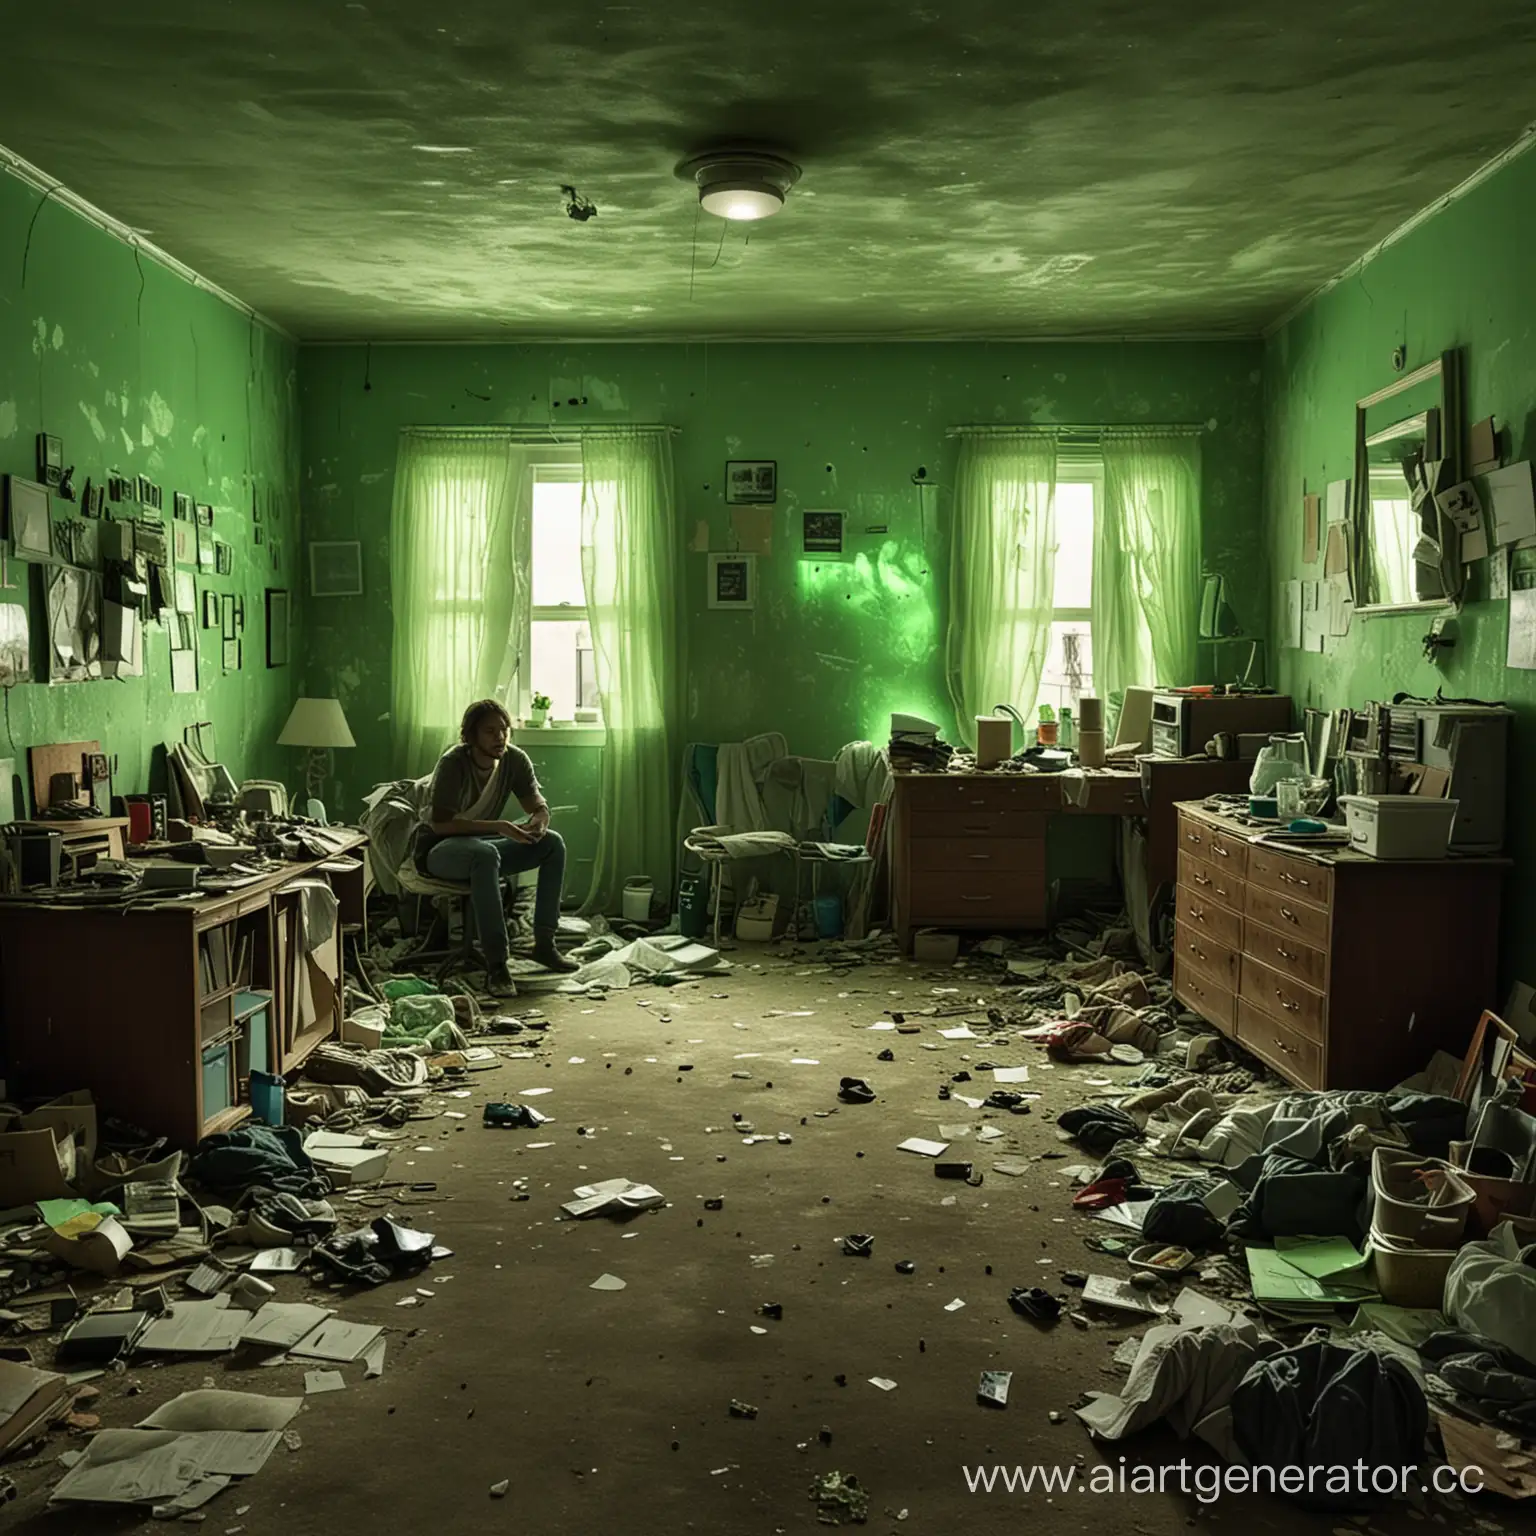 Cluttered-Room-with-Person-Sitting-in-Dim-Green-Light